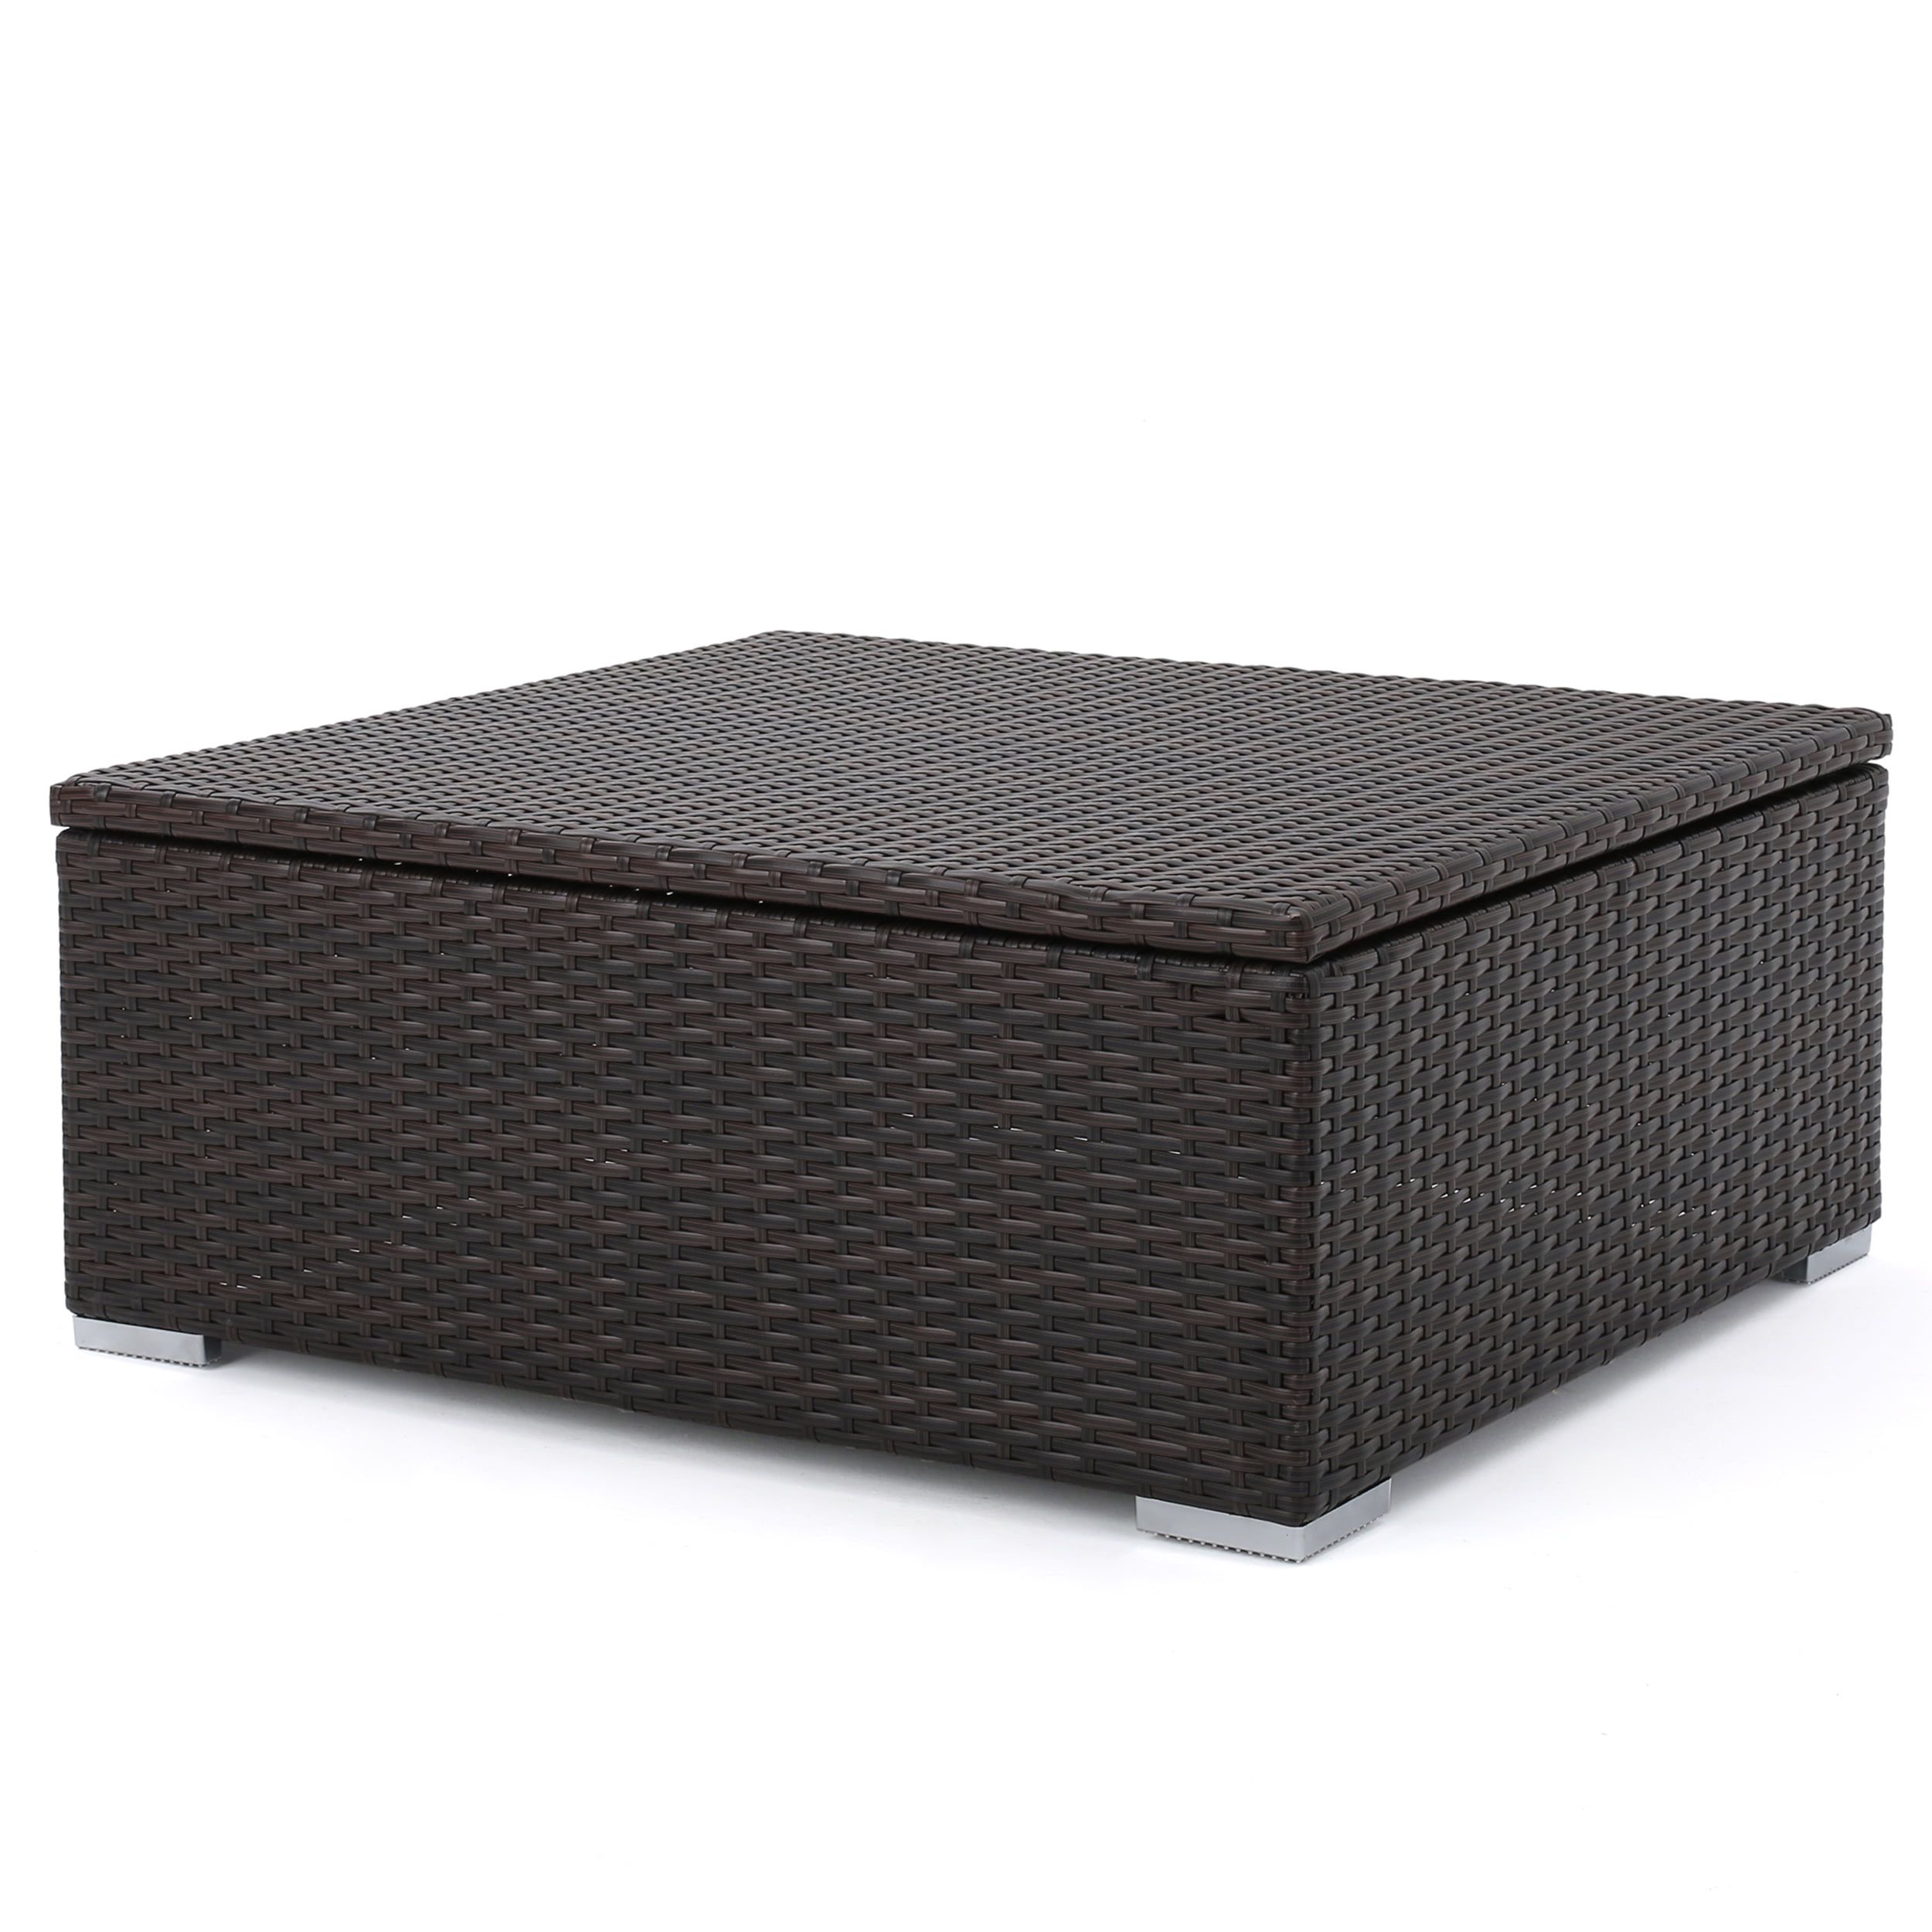 Costa Mesa Outdoor Wicker Coffee Table With Storage, Multibrown In Waterproof Coffee Tables (View 4 of 21)